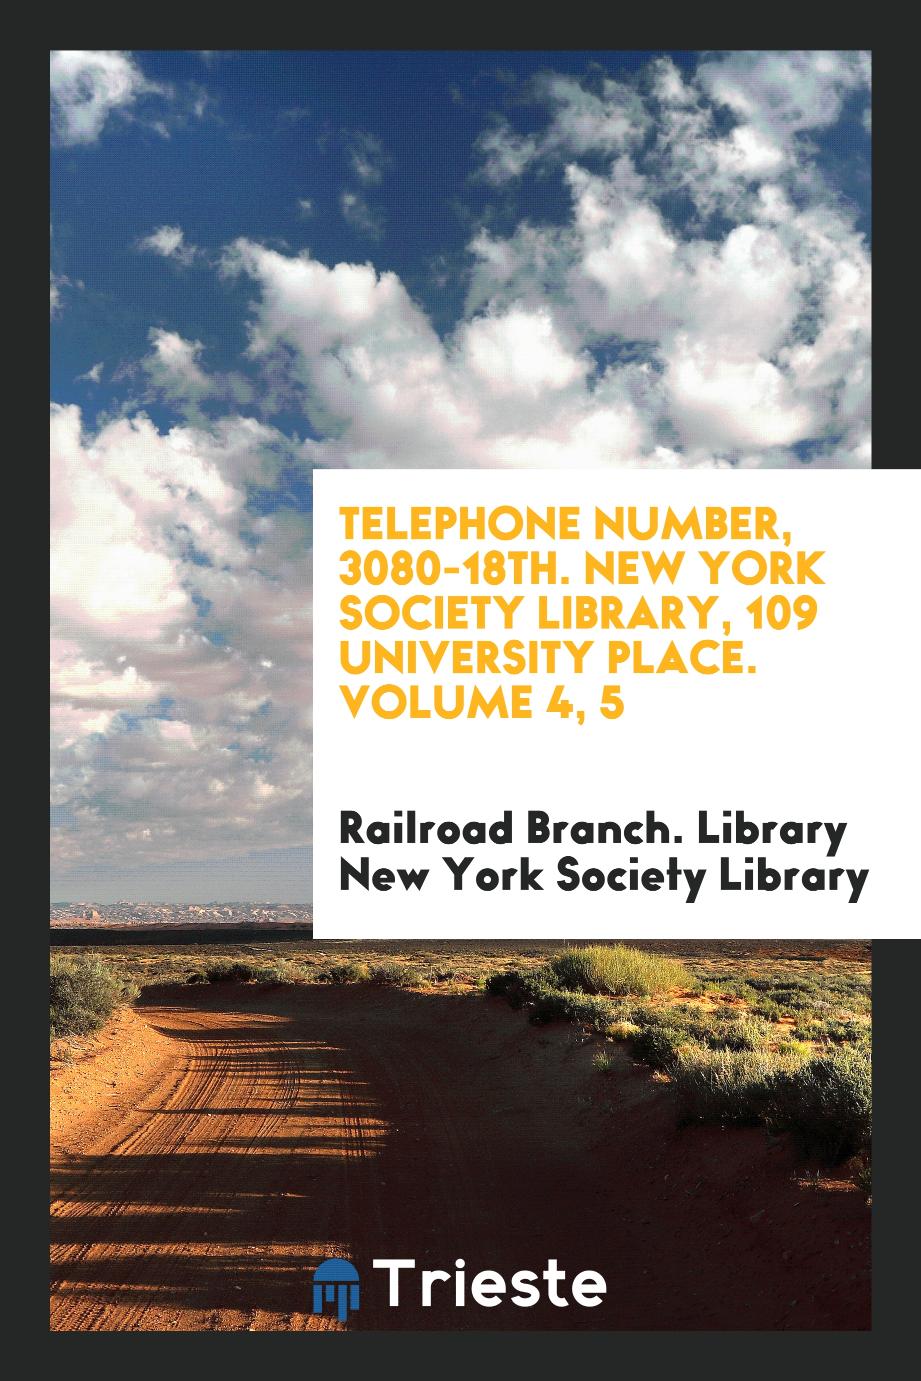 Telephone Number, 3080-18th. New York Society Library, 109 University Place. Volume 4, 5